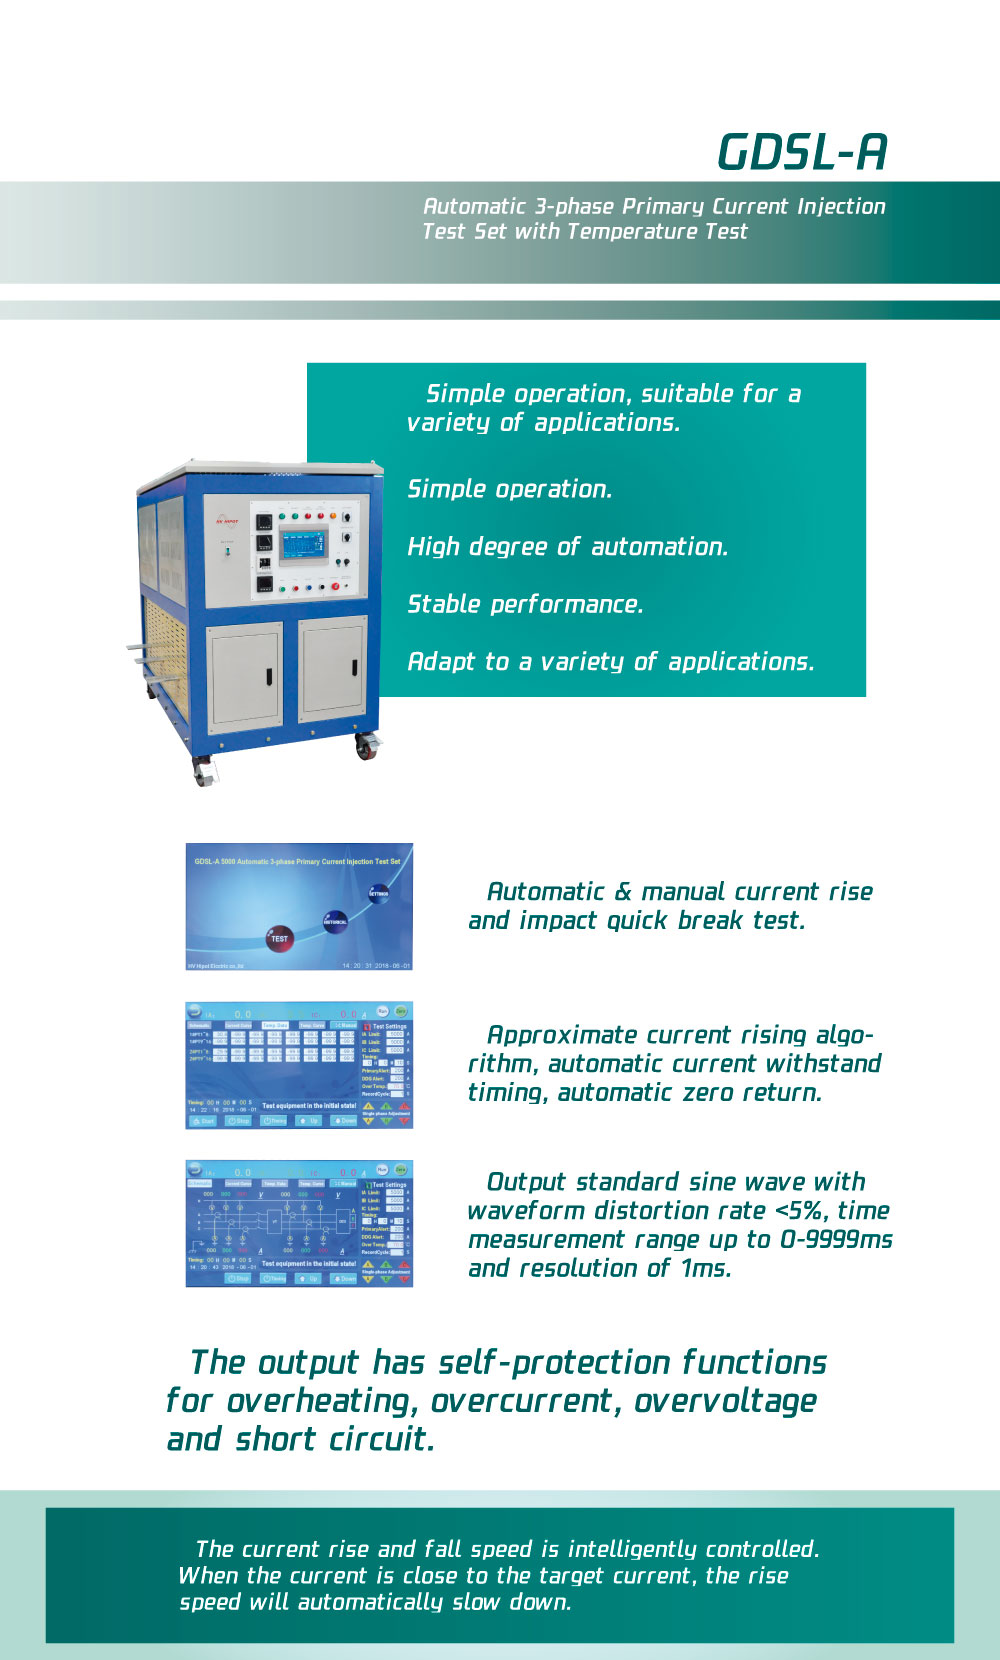 GDSL-A 3-phase Primary Current Injection Test ကို Temperature Test ဖြင့် သတ်မှတ်သည်။